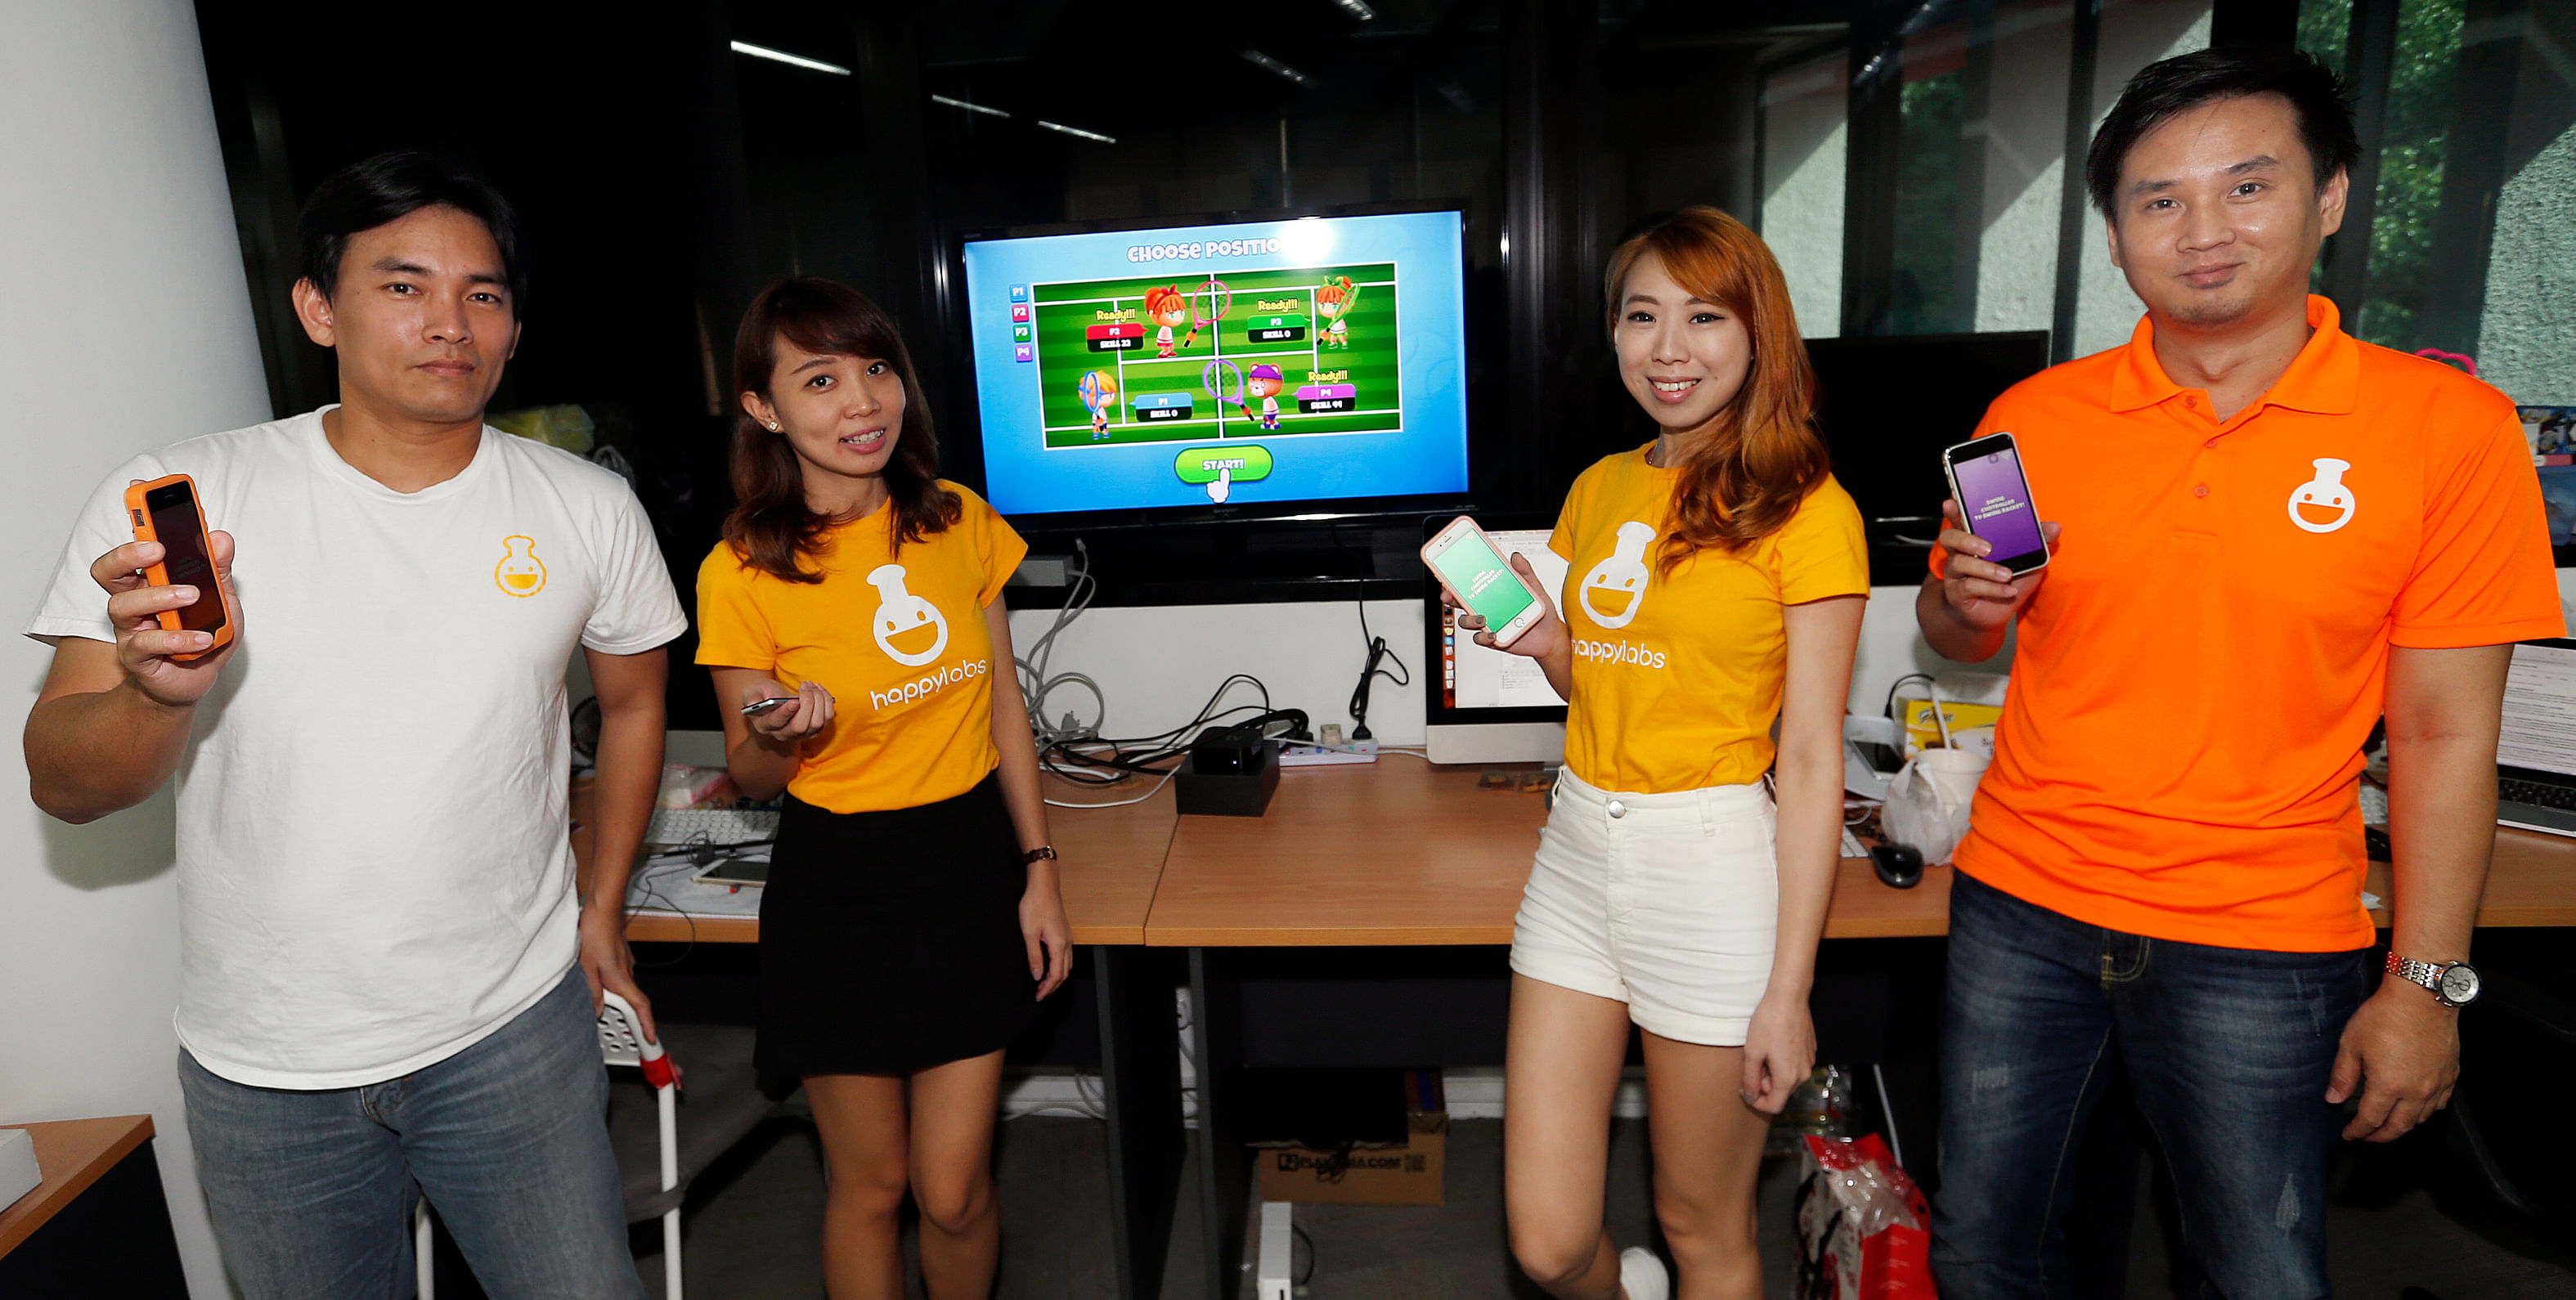 Local gaming company Happy Labs is one of the first in Asia to create a motion-sensing game for the Apple TV. Their app, Happy Tennis, allows players to use one Apple TV Remote and 3 iPhones to play virtual tennis. Seen here are (from far left): CEO 